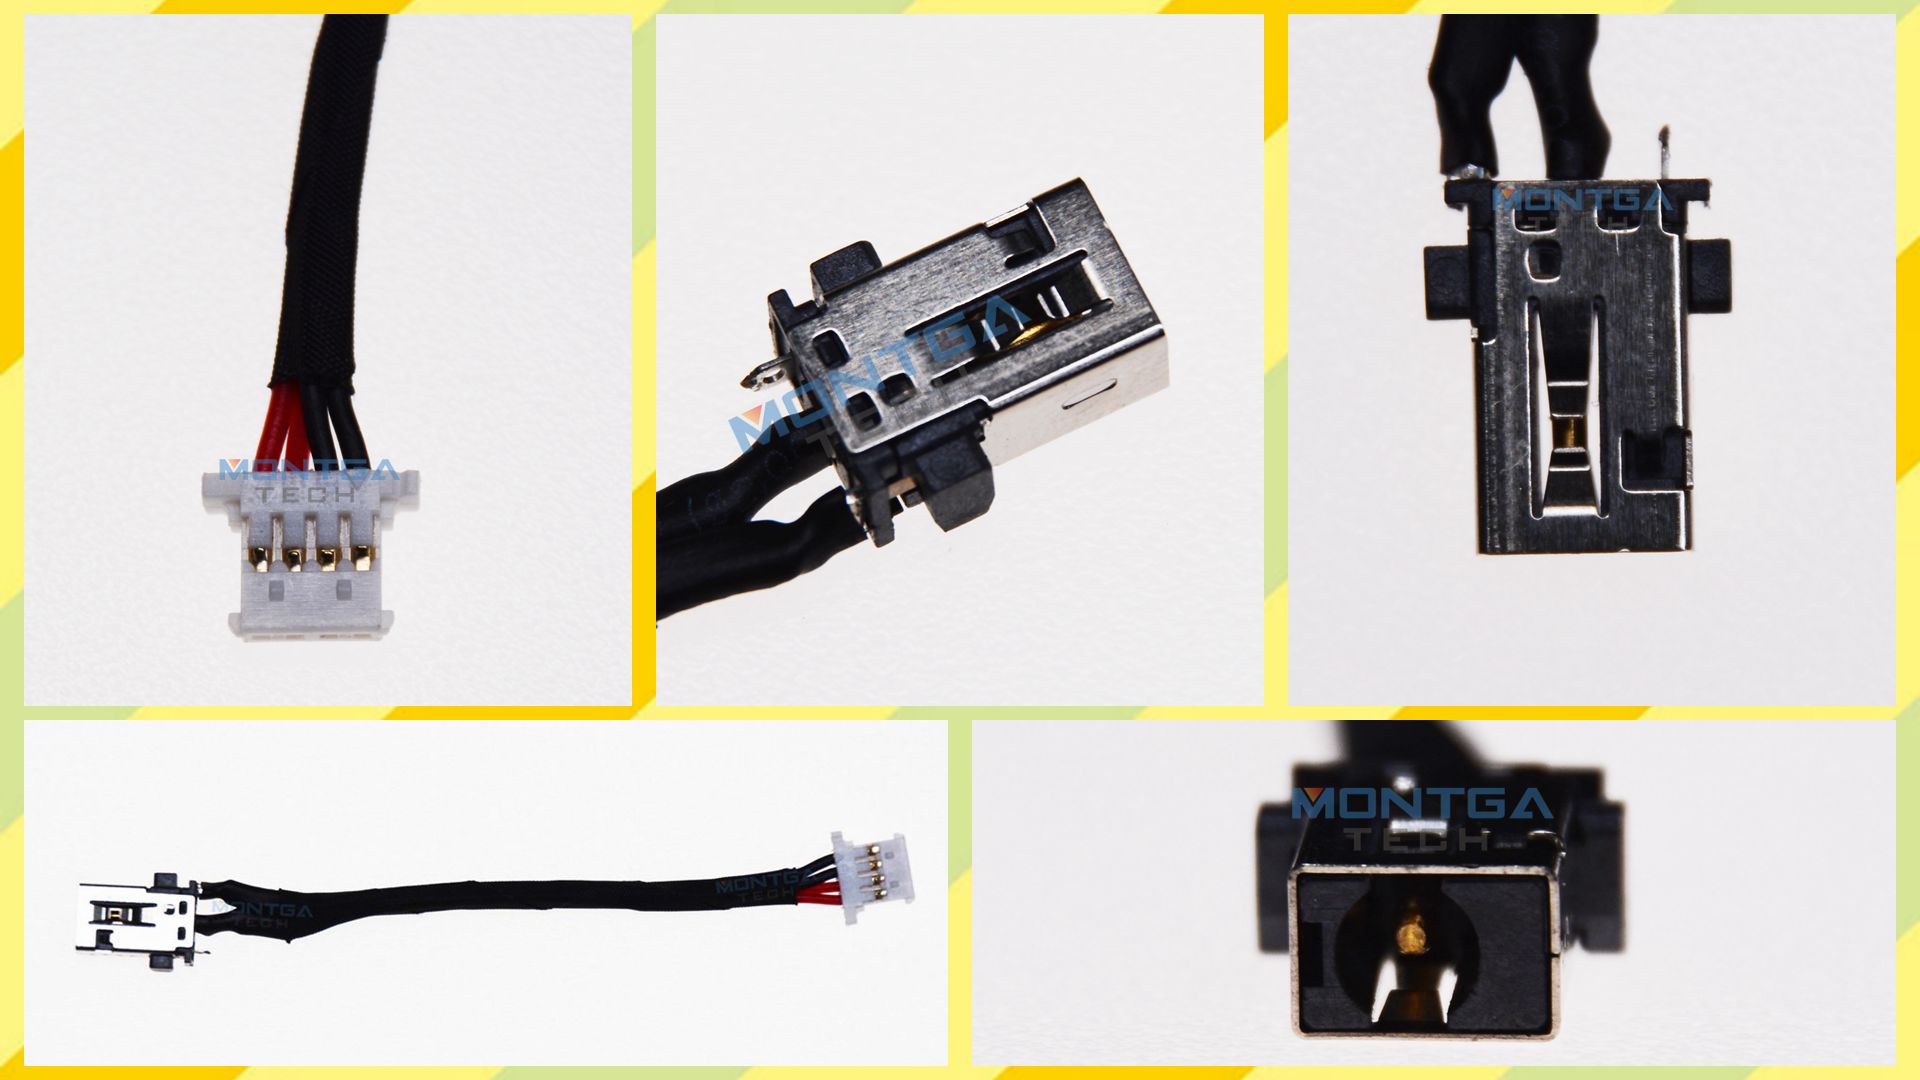 Acer SF515-51 charging connector, Acer SF515-51 DC Power Jack, Acer SF515-51 DC IN Cable, Acer SF515-51 Power Jack, Acer SF515-51 plug, Acer SF515-51 Jack socket, Acer SF515-51 connecteur de charge, 